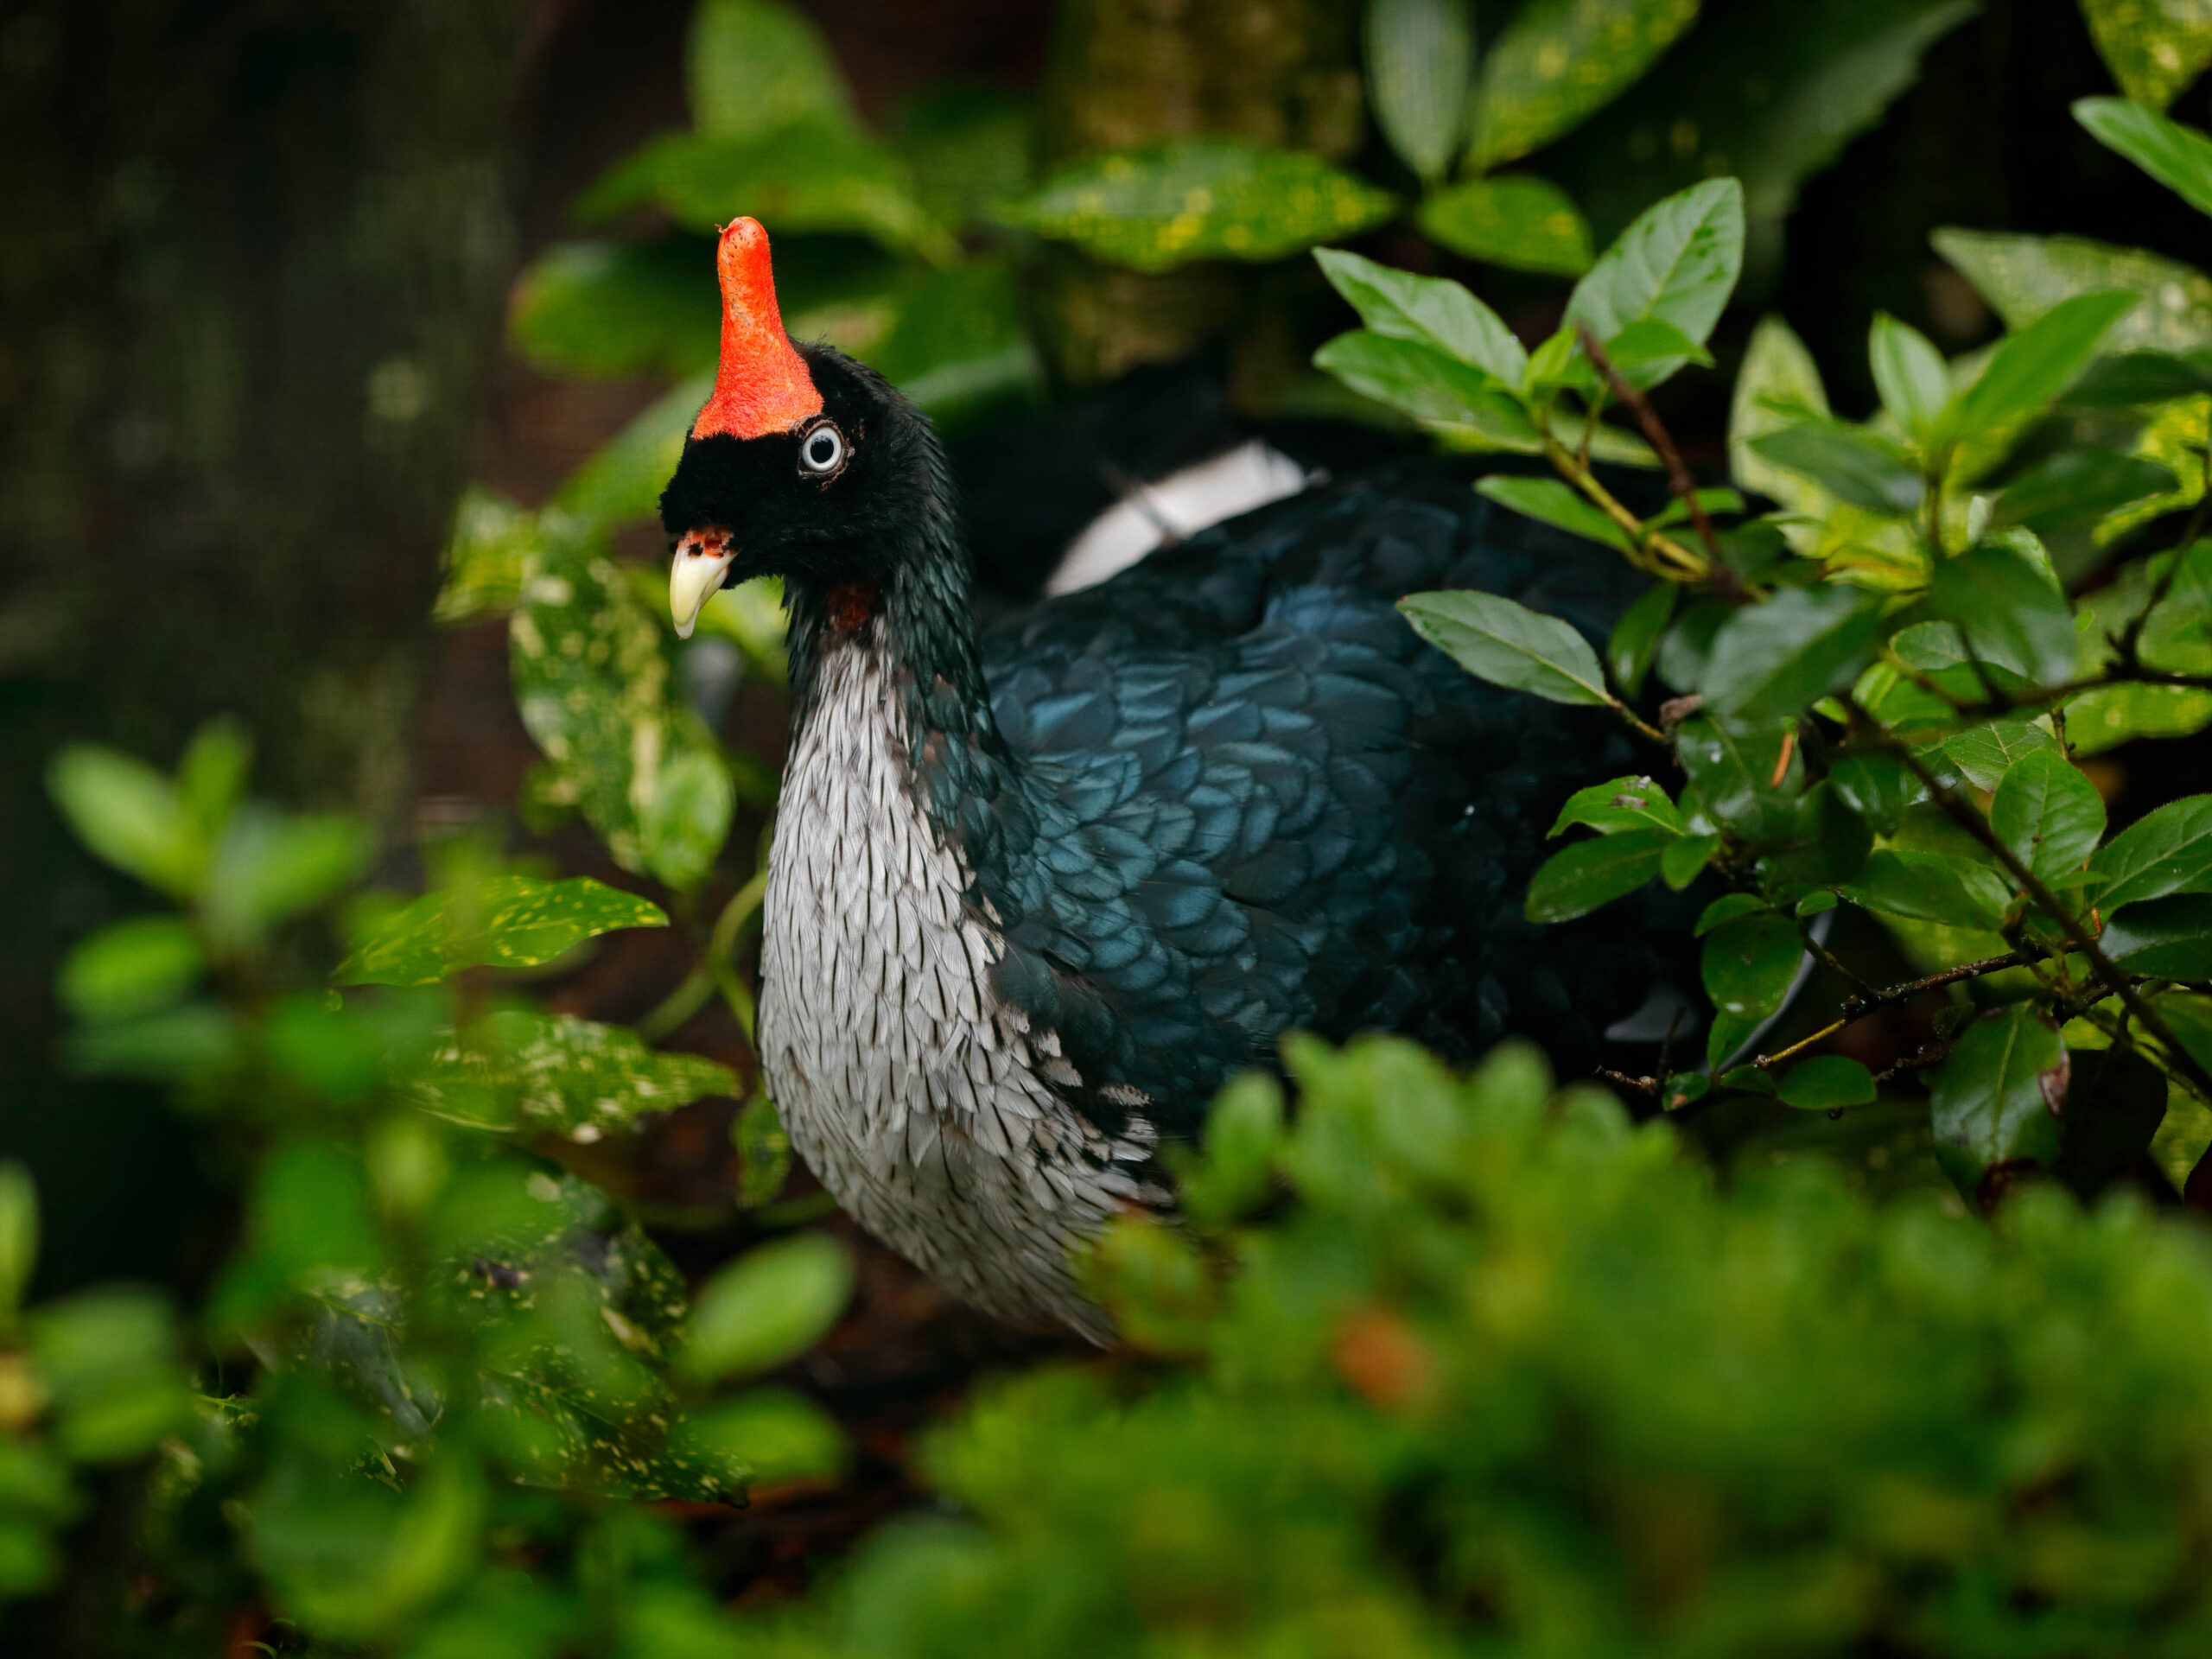 The rare Horned Guan from Guatemala